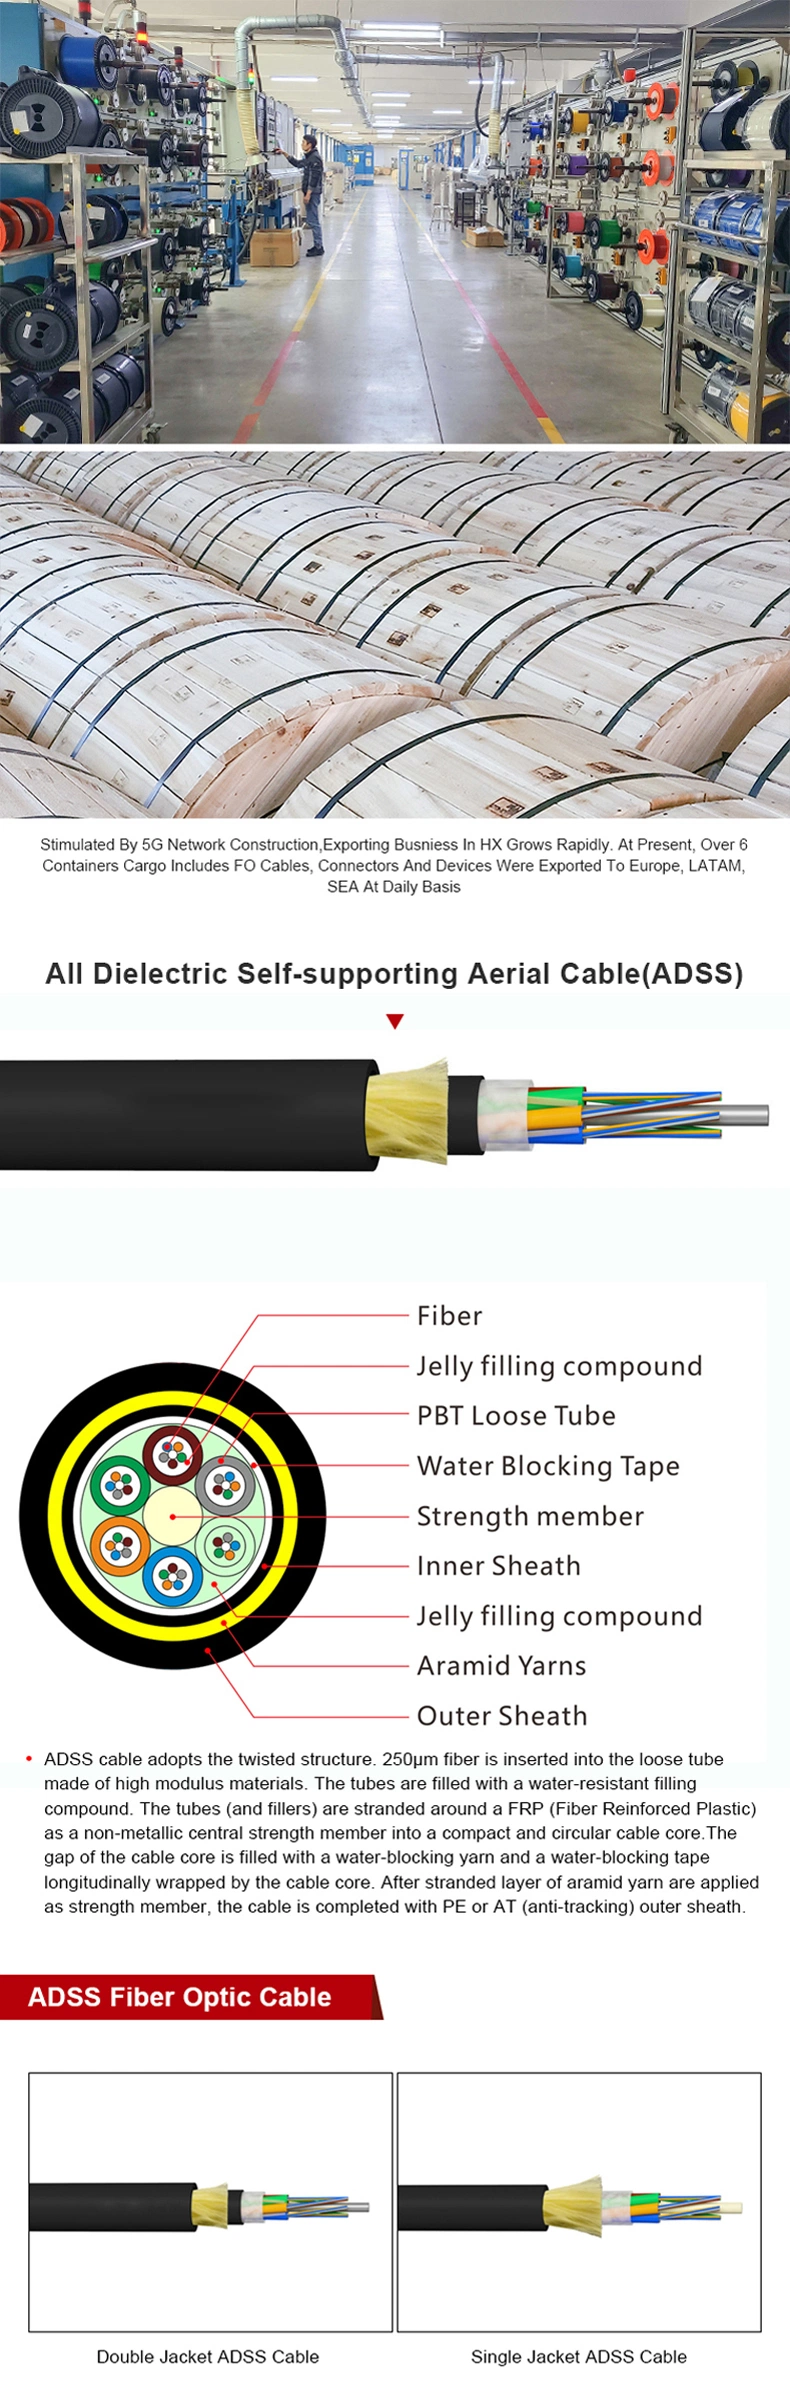 All Dielectric Self-Supporting 24 Core Single Mode ADSS Optic Fiber for Telecommunication